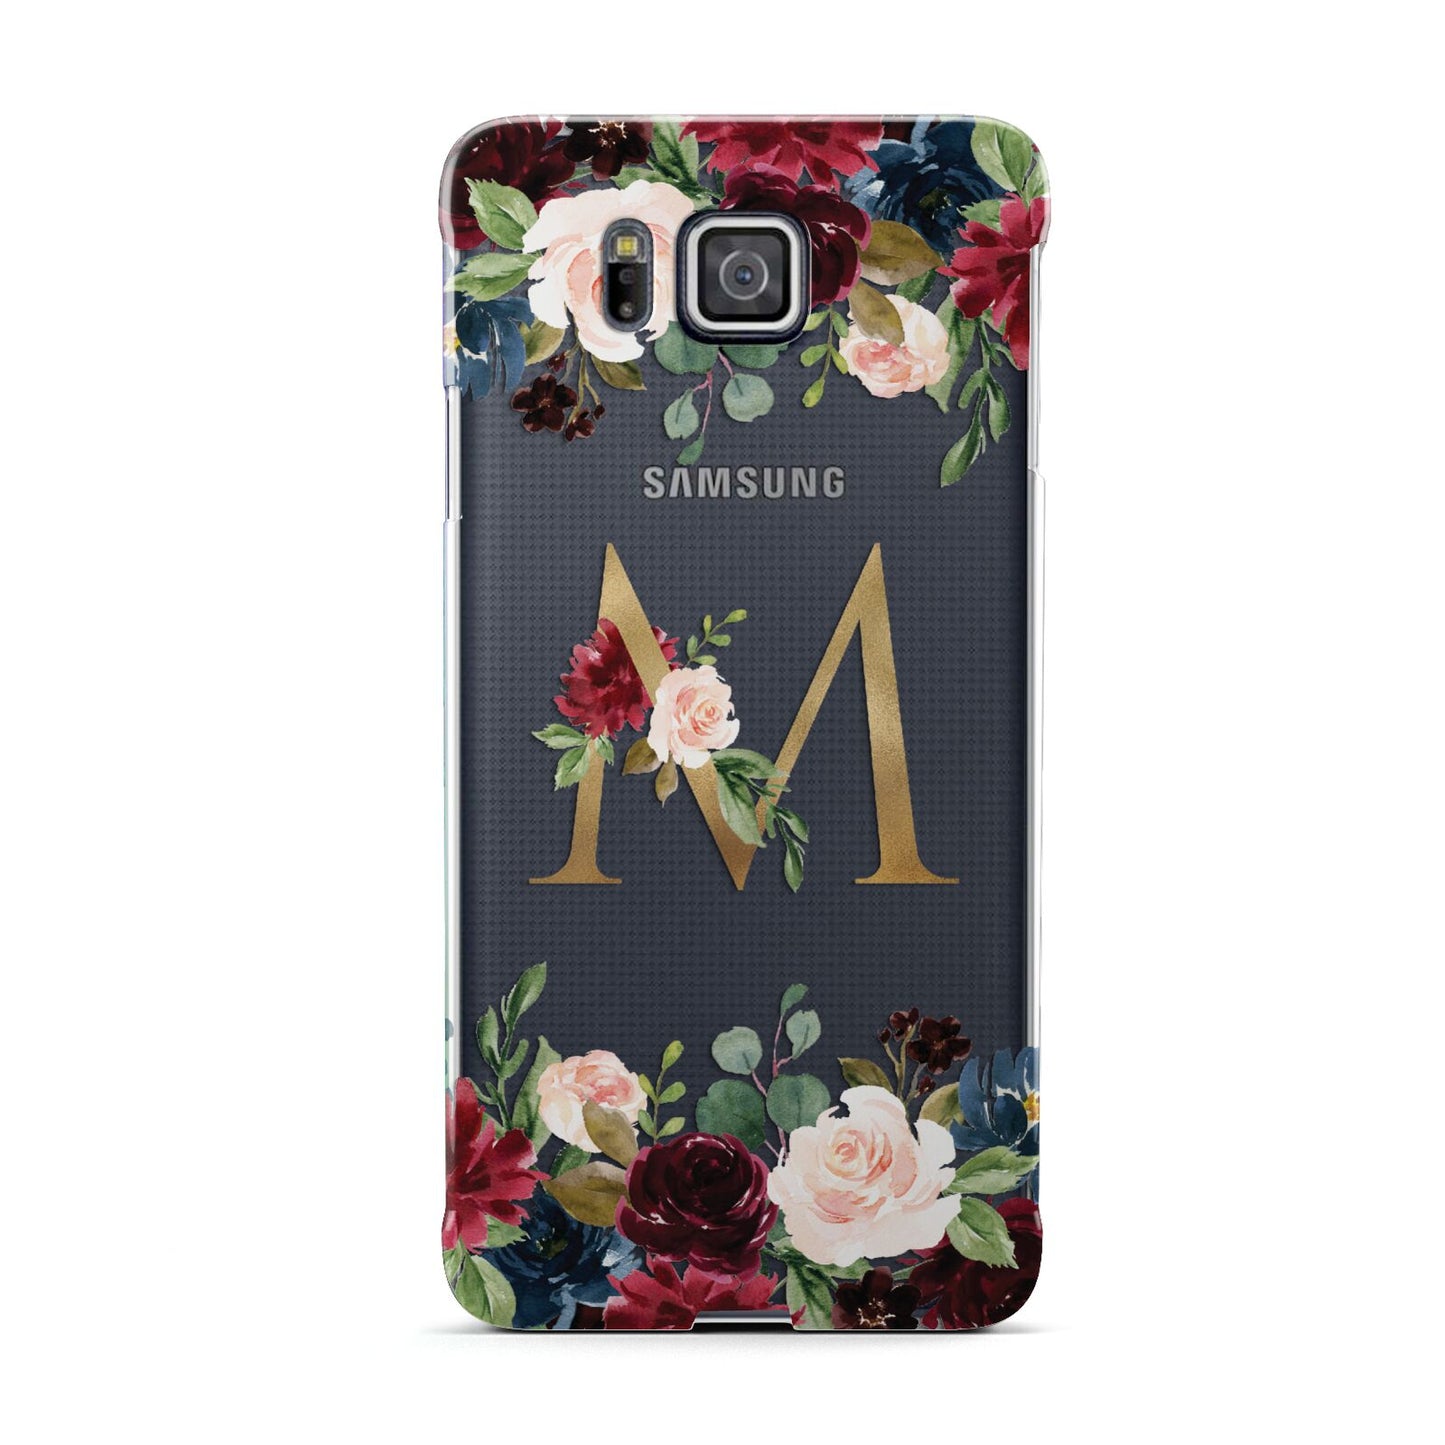 Personalised Clear Monogram Floral Samsung Galaxy Alpha Case